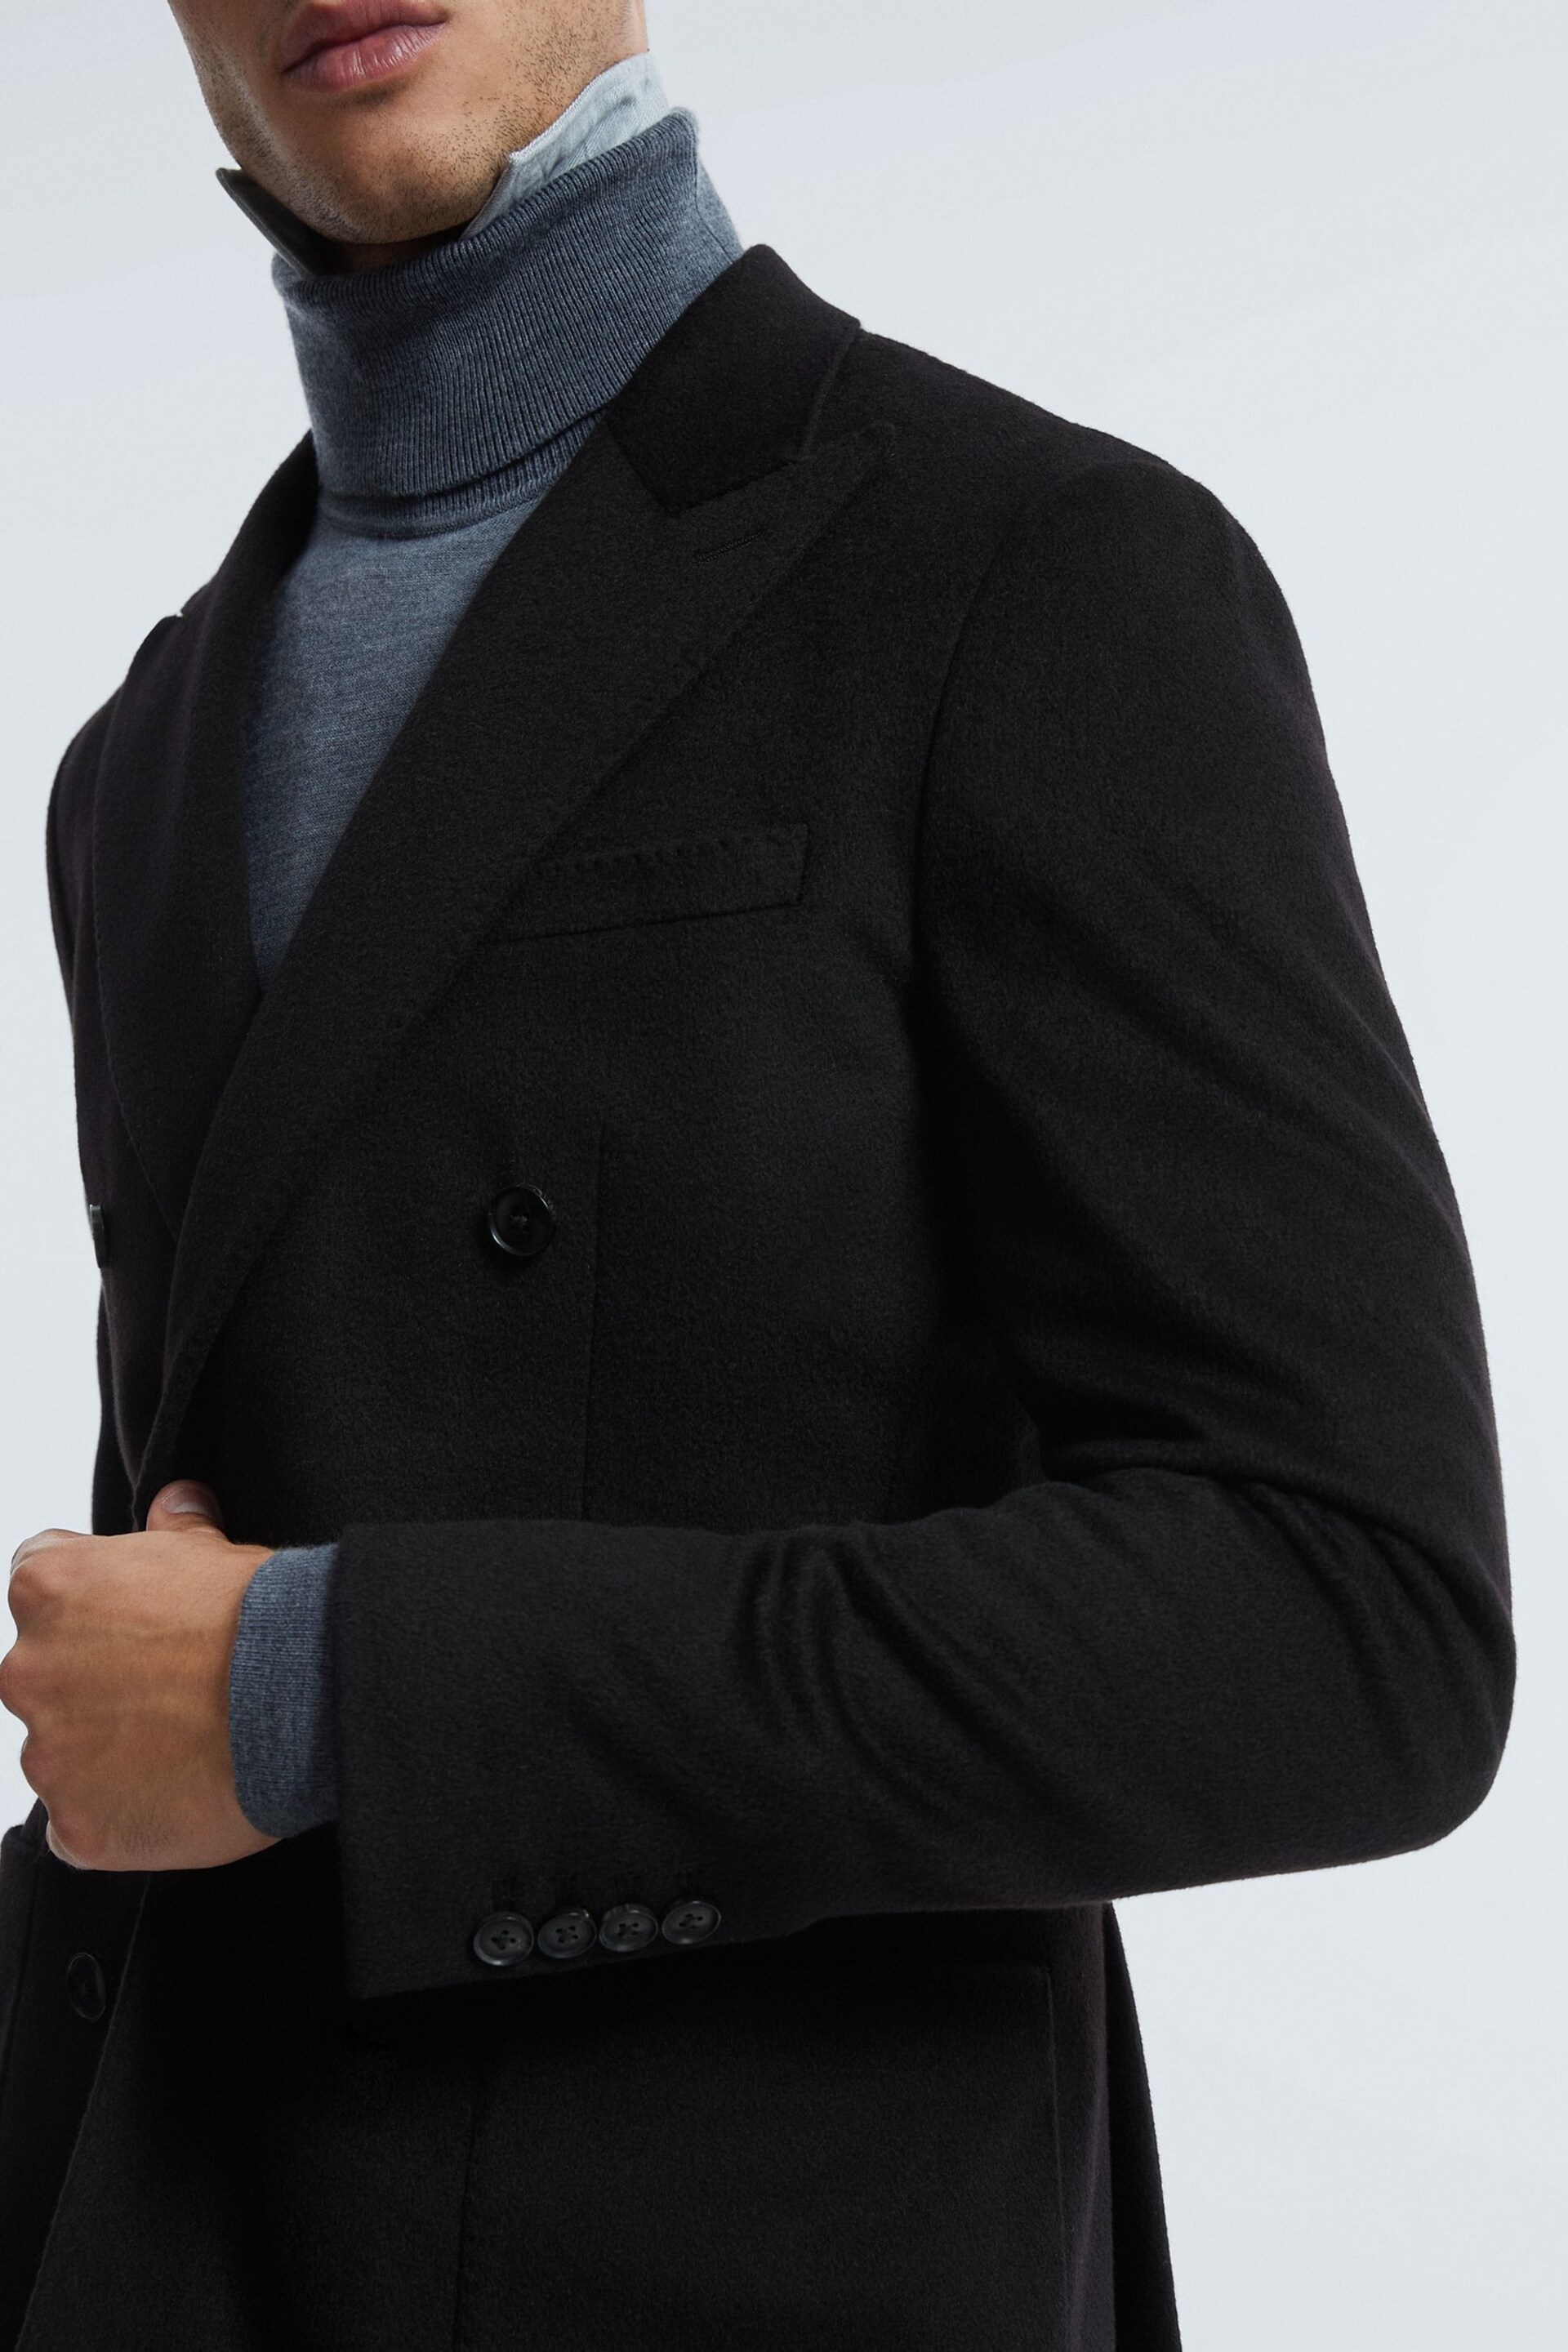 Atelier Cashmere Slim Fit Double Breasted Blazer - Image 4 of 8